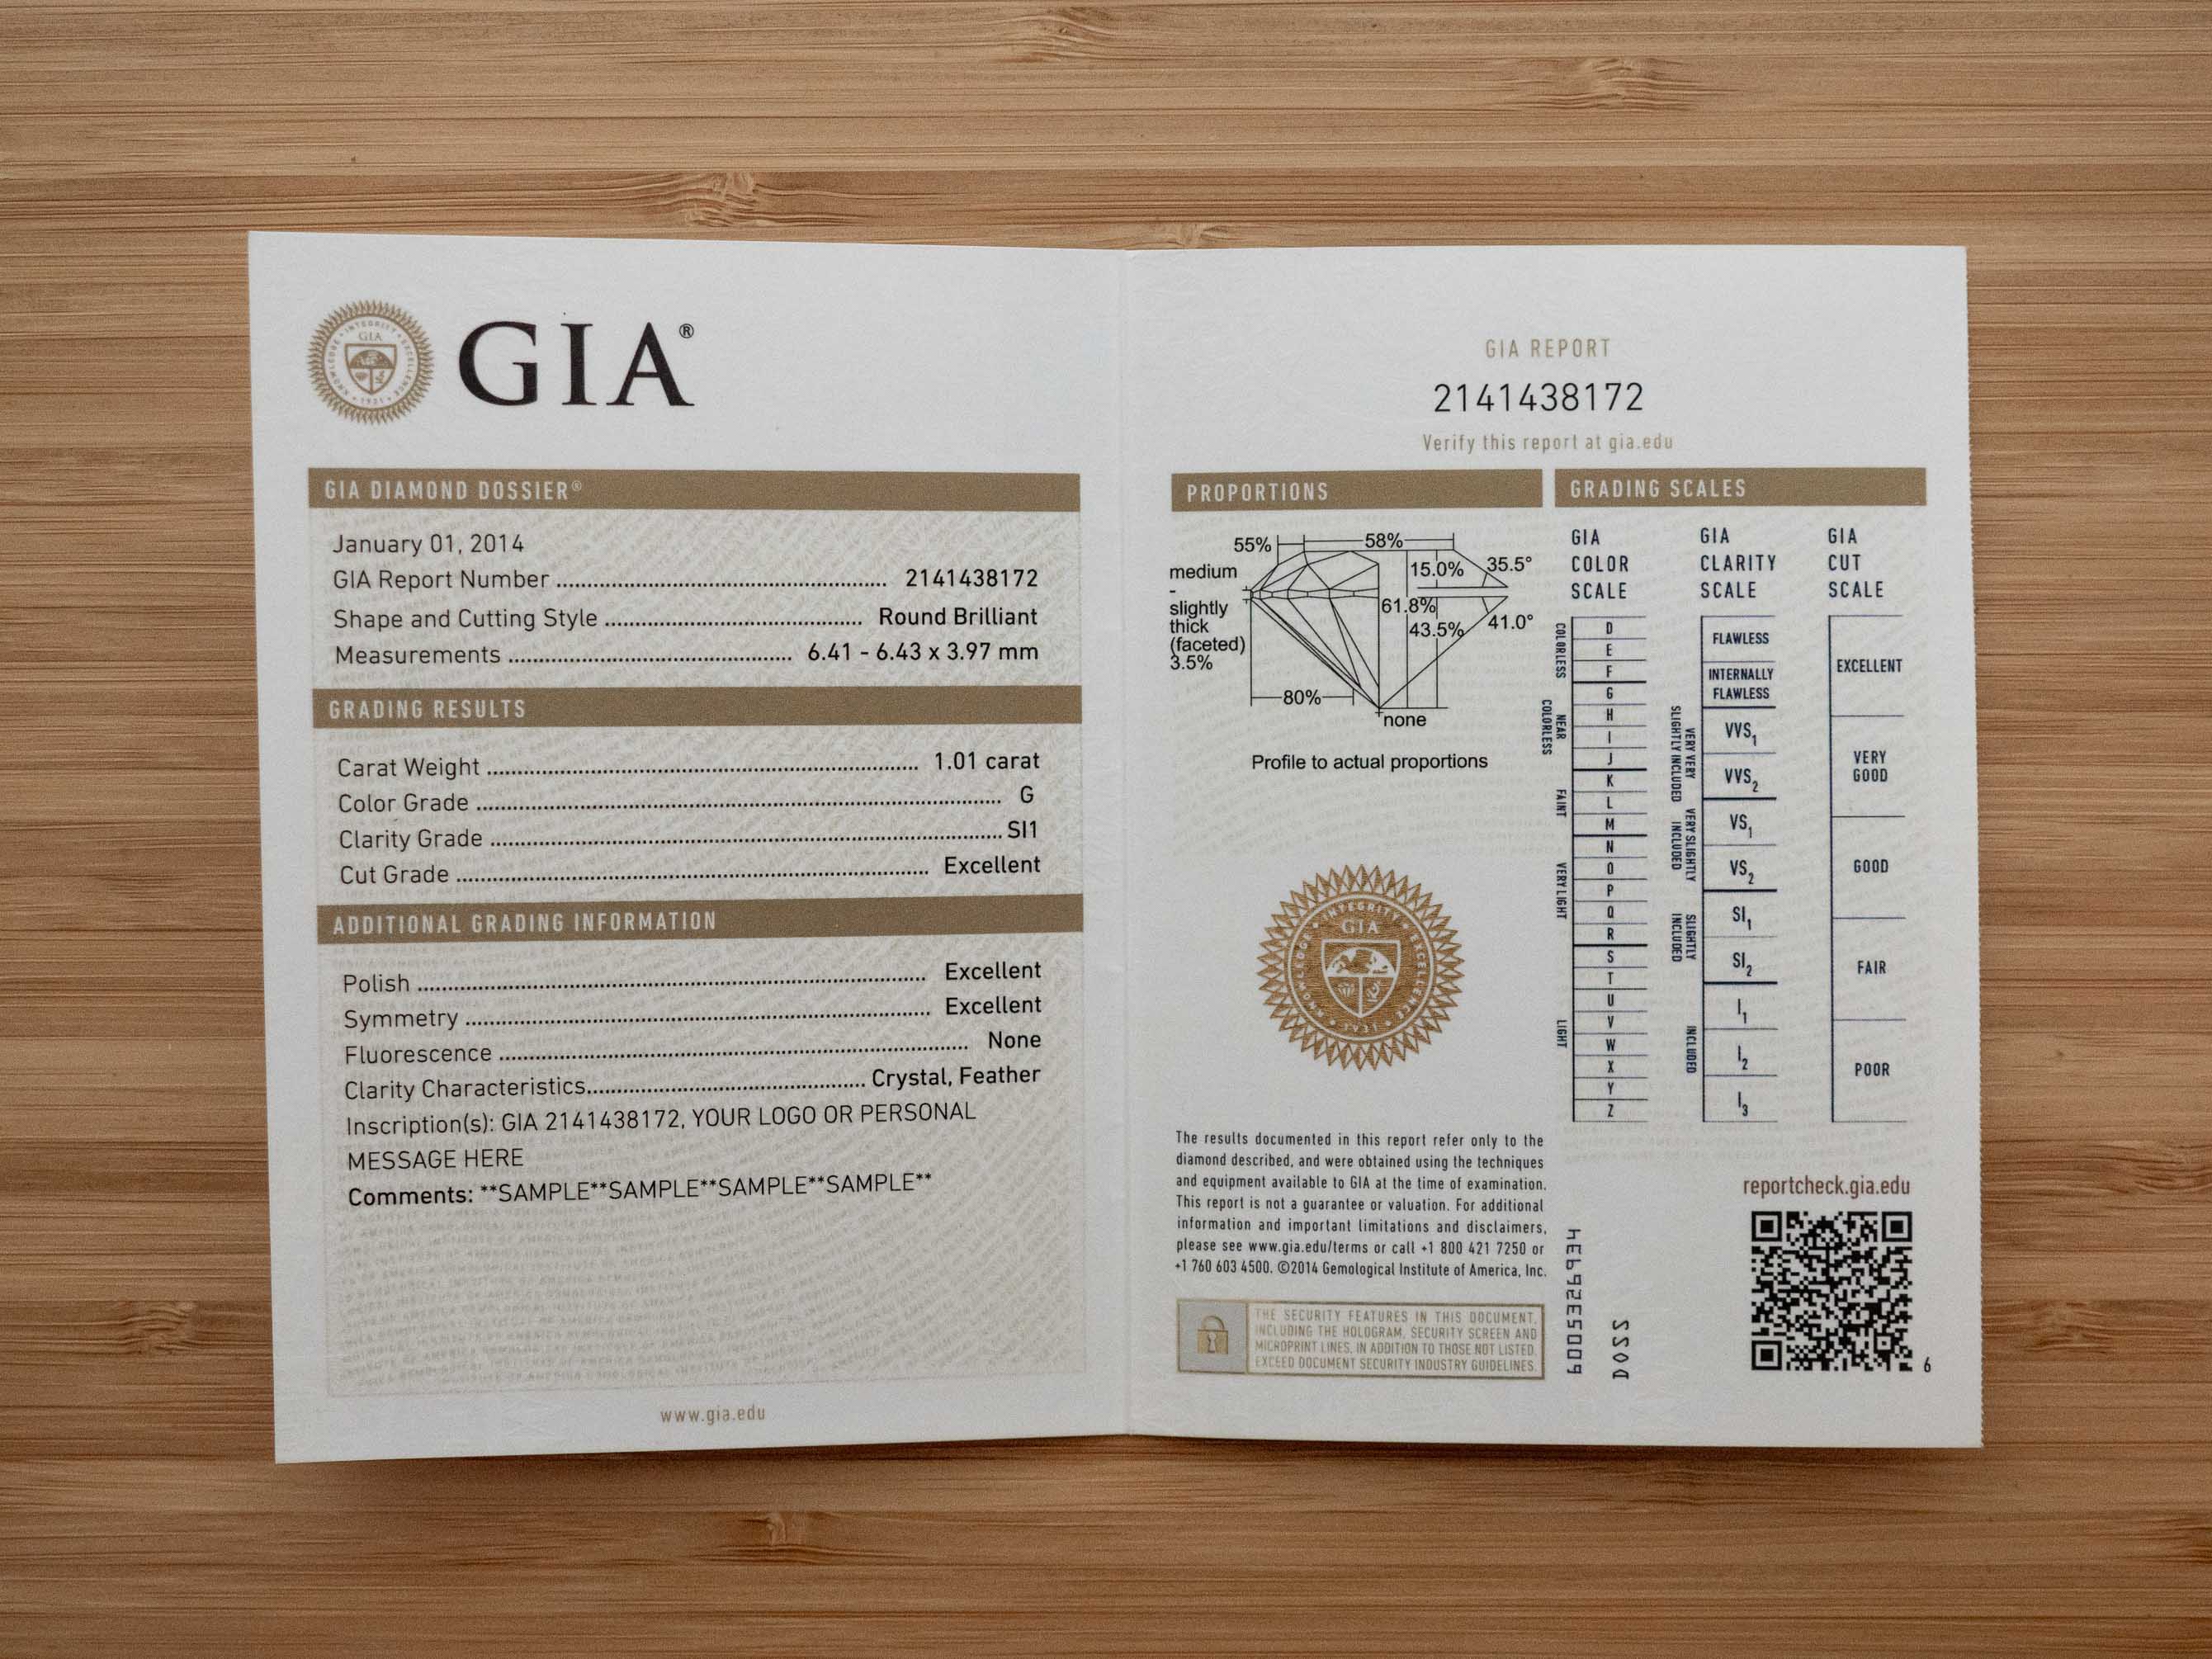 GIA Diamond Grading Report with main components of the report